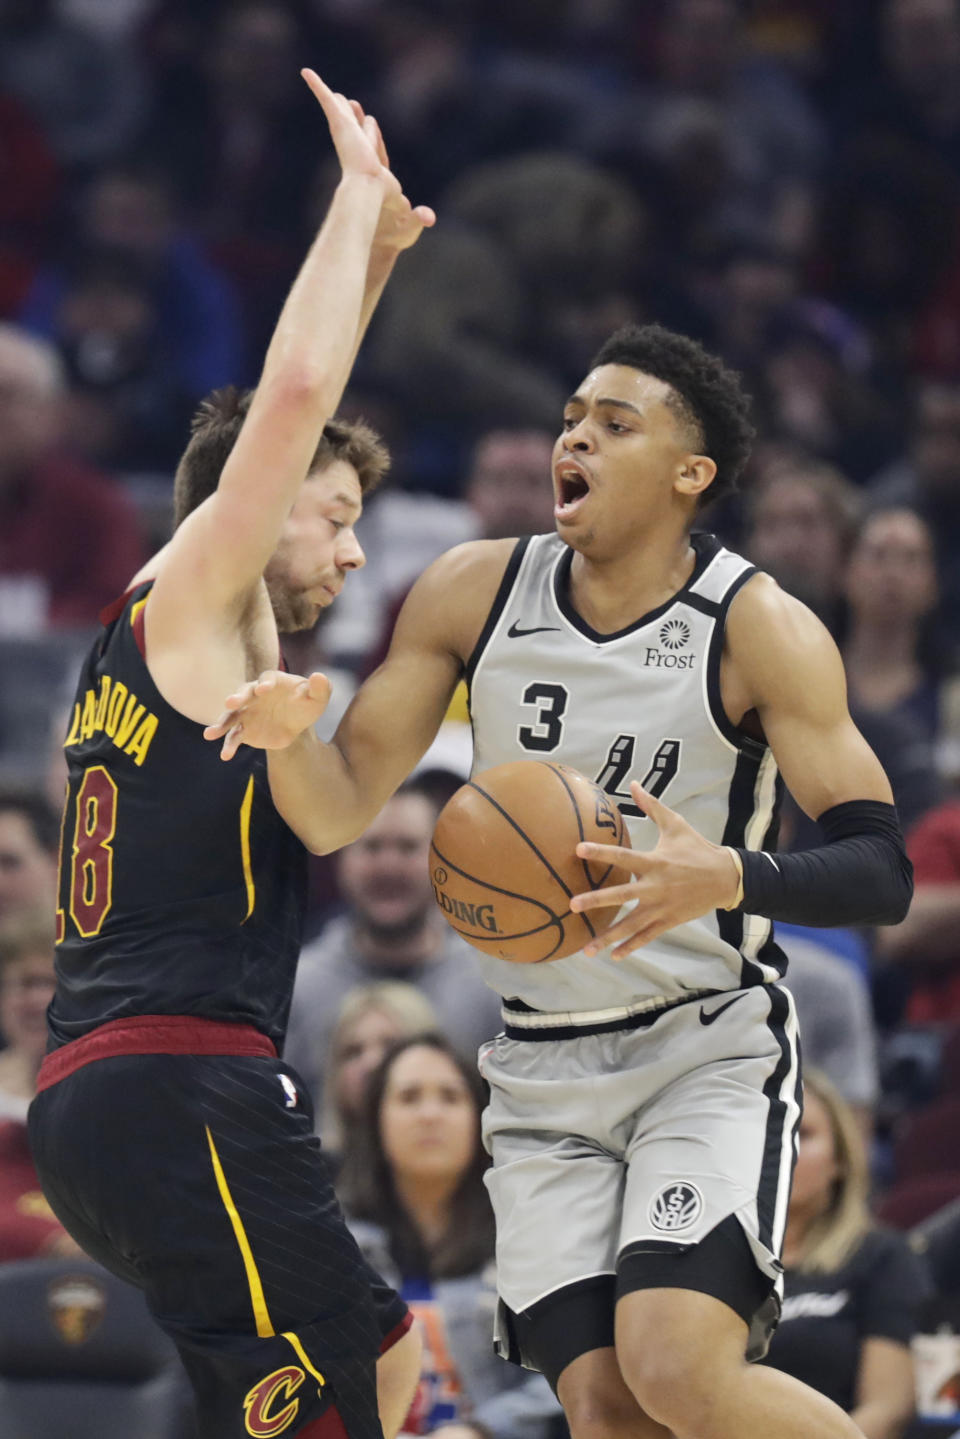 San Antonio Spurs' Keldon Johnson (3) is fouled by Cleveland Cavaliers' Matthew Dellavedova (18) in the first half of an NBA basketball game, Sunday, March 8, 2020, in Cleveland. (AP Photo/Tony Dejak)